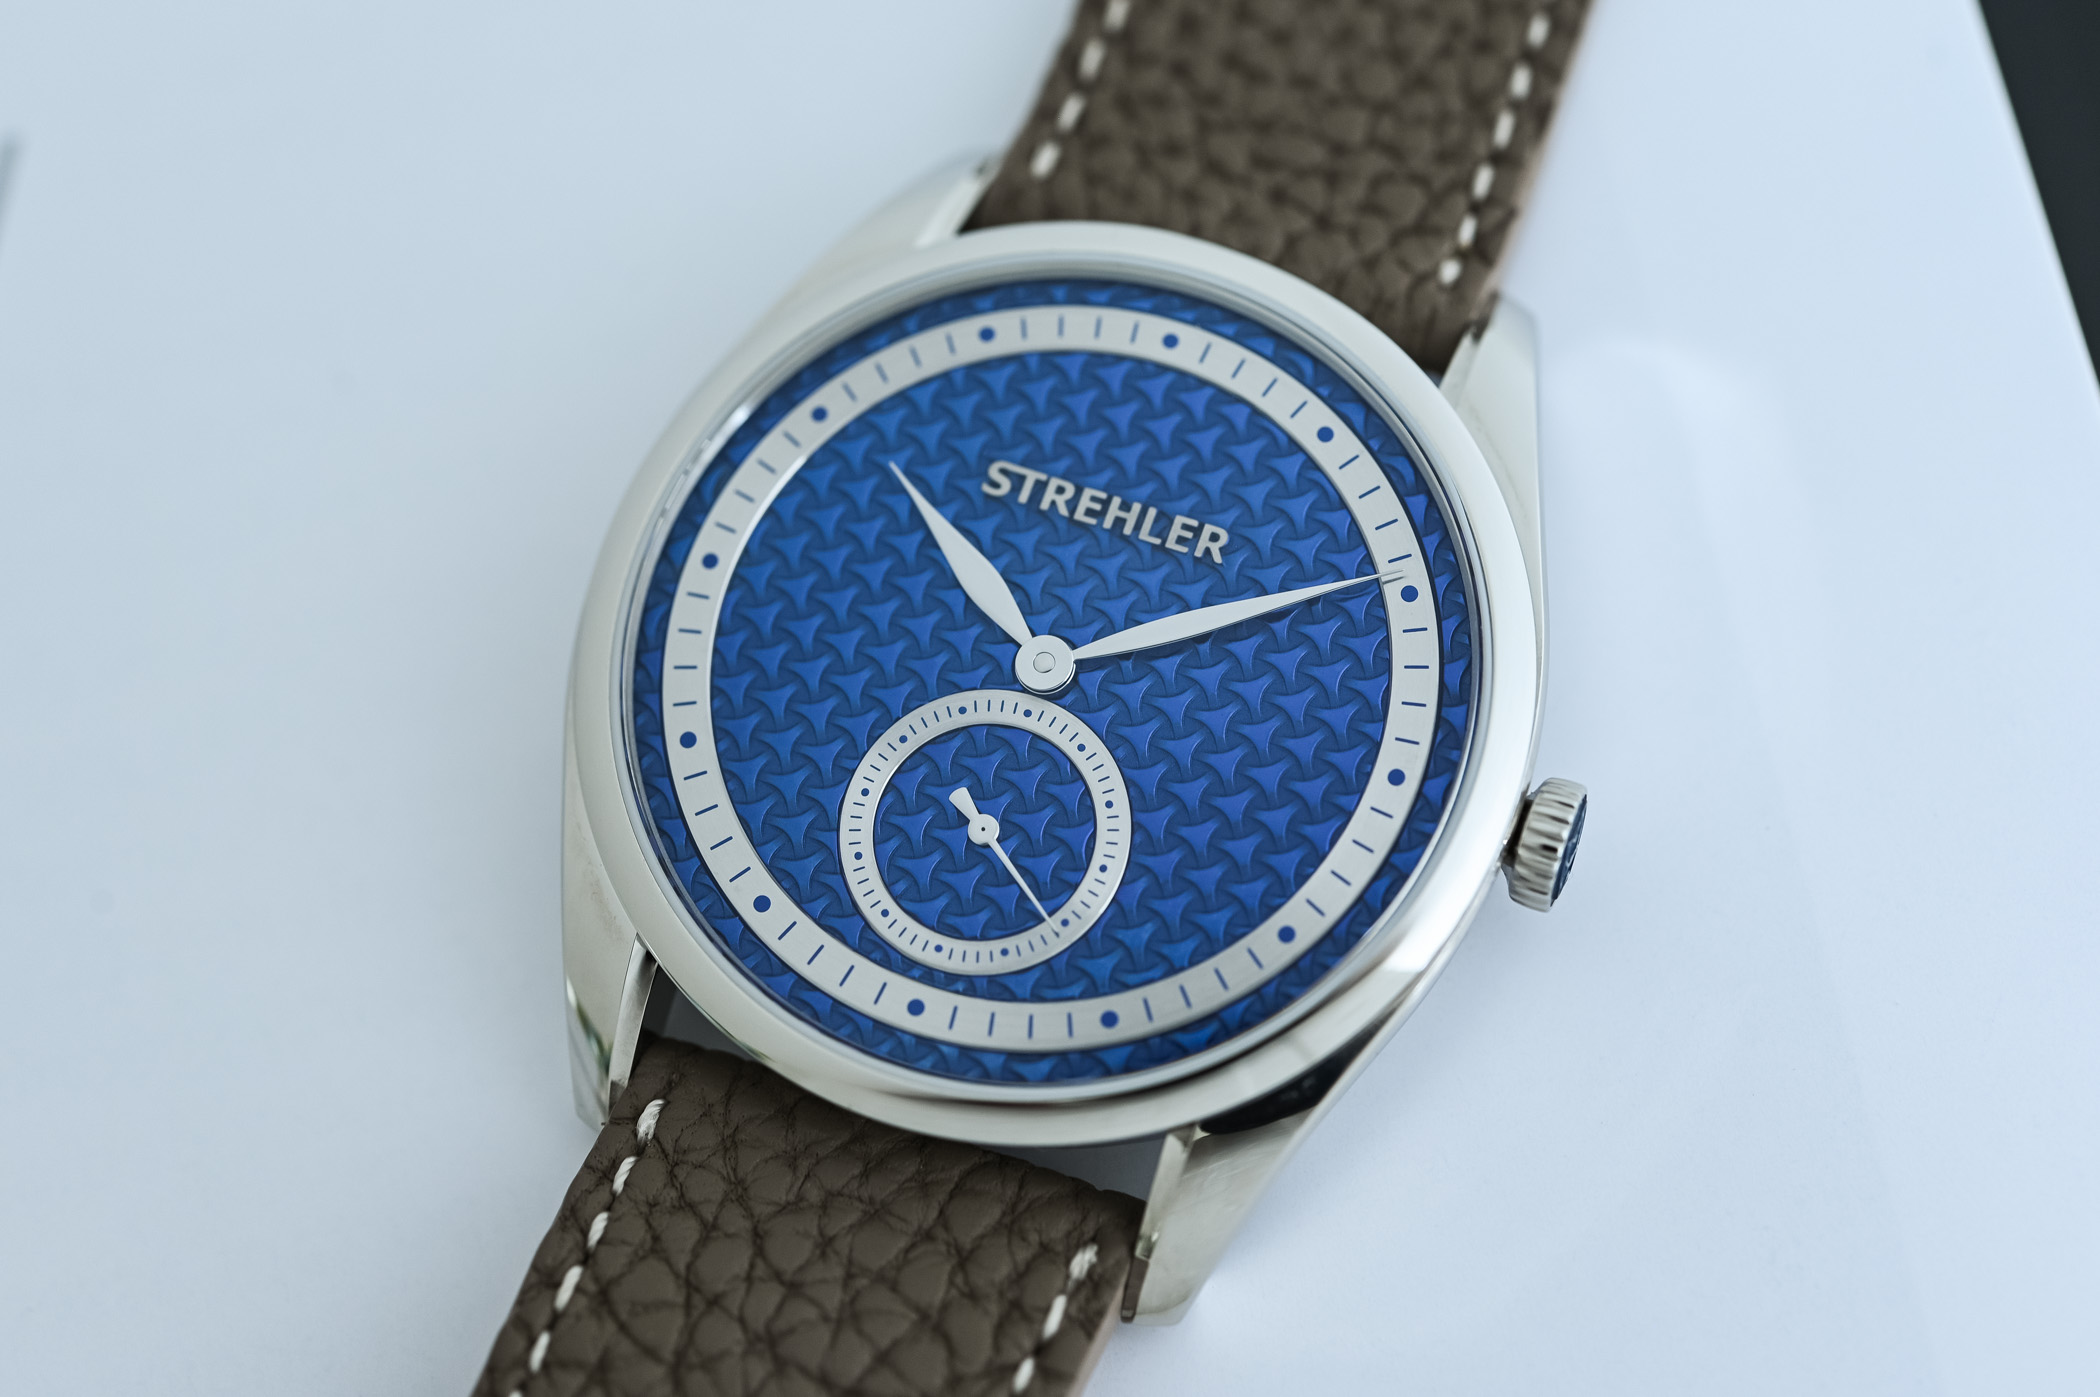 Strehler Sirna - New Brand and Watch of Andreas Strehler